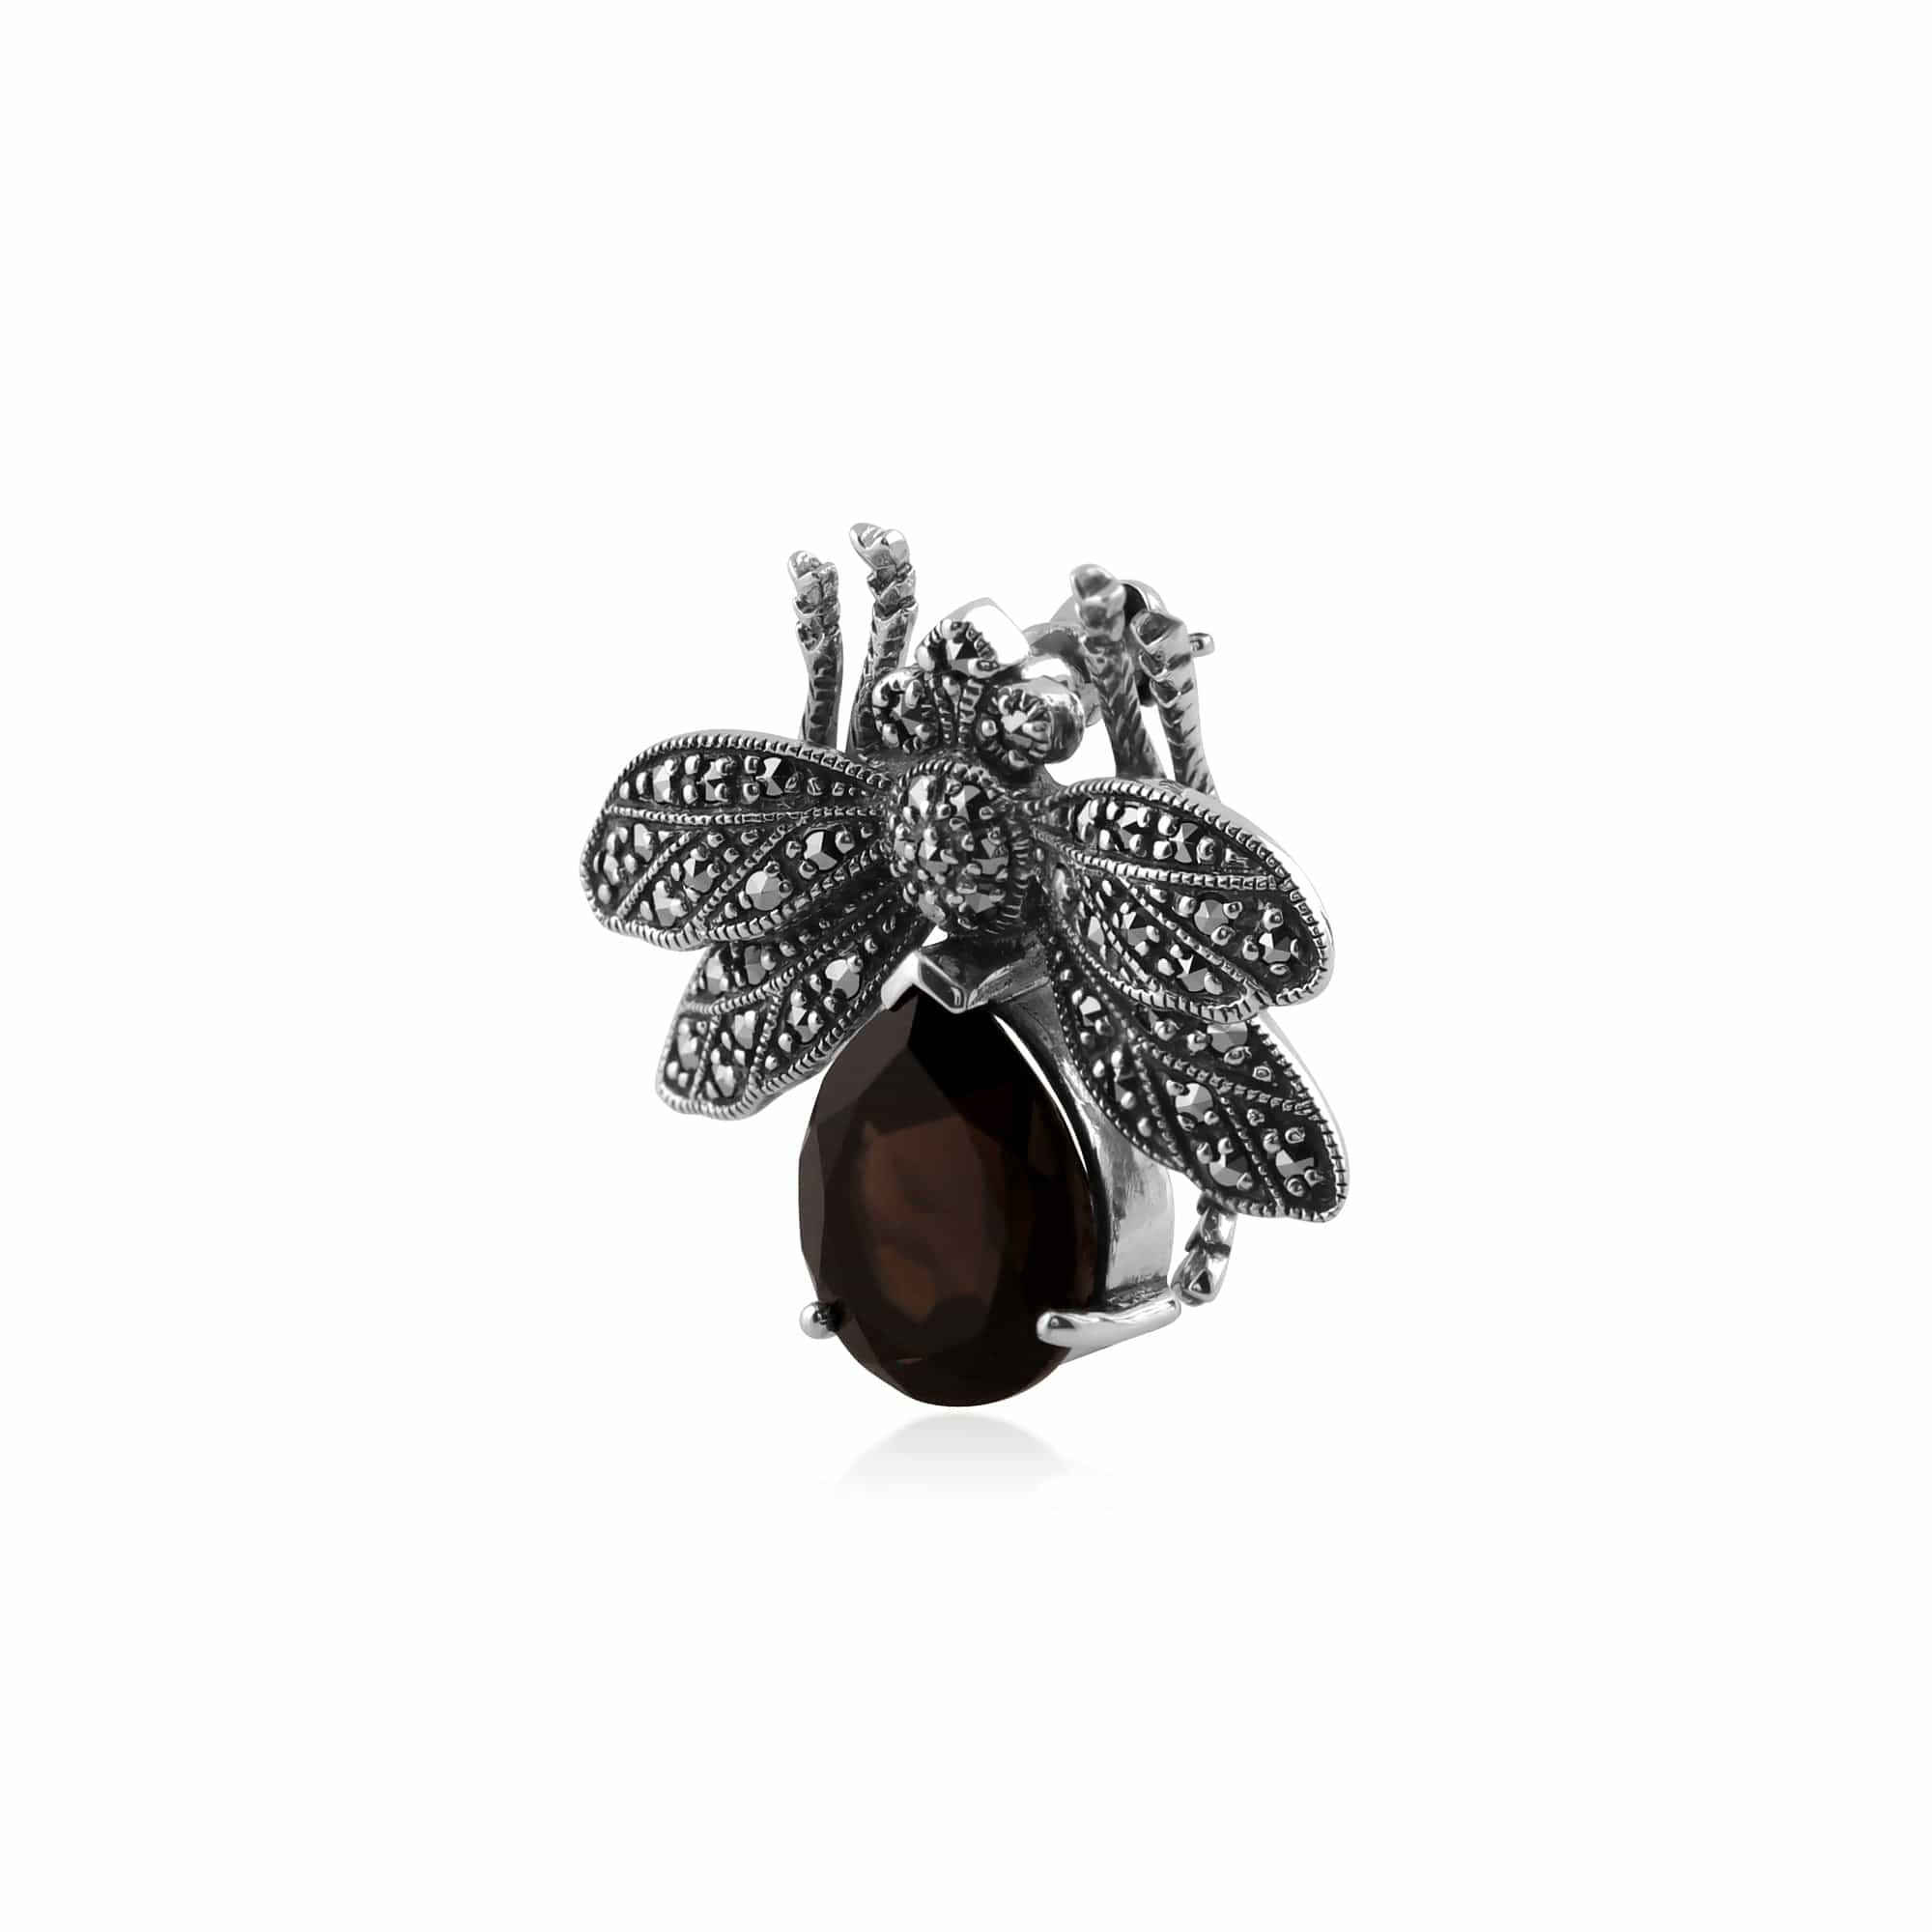 21880 Marcasite & Smokey Quartz Bumble Bee Brooch in 925 Sterling Silver 2